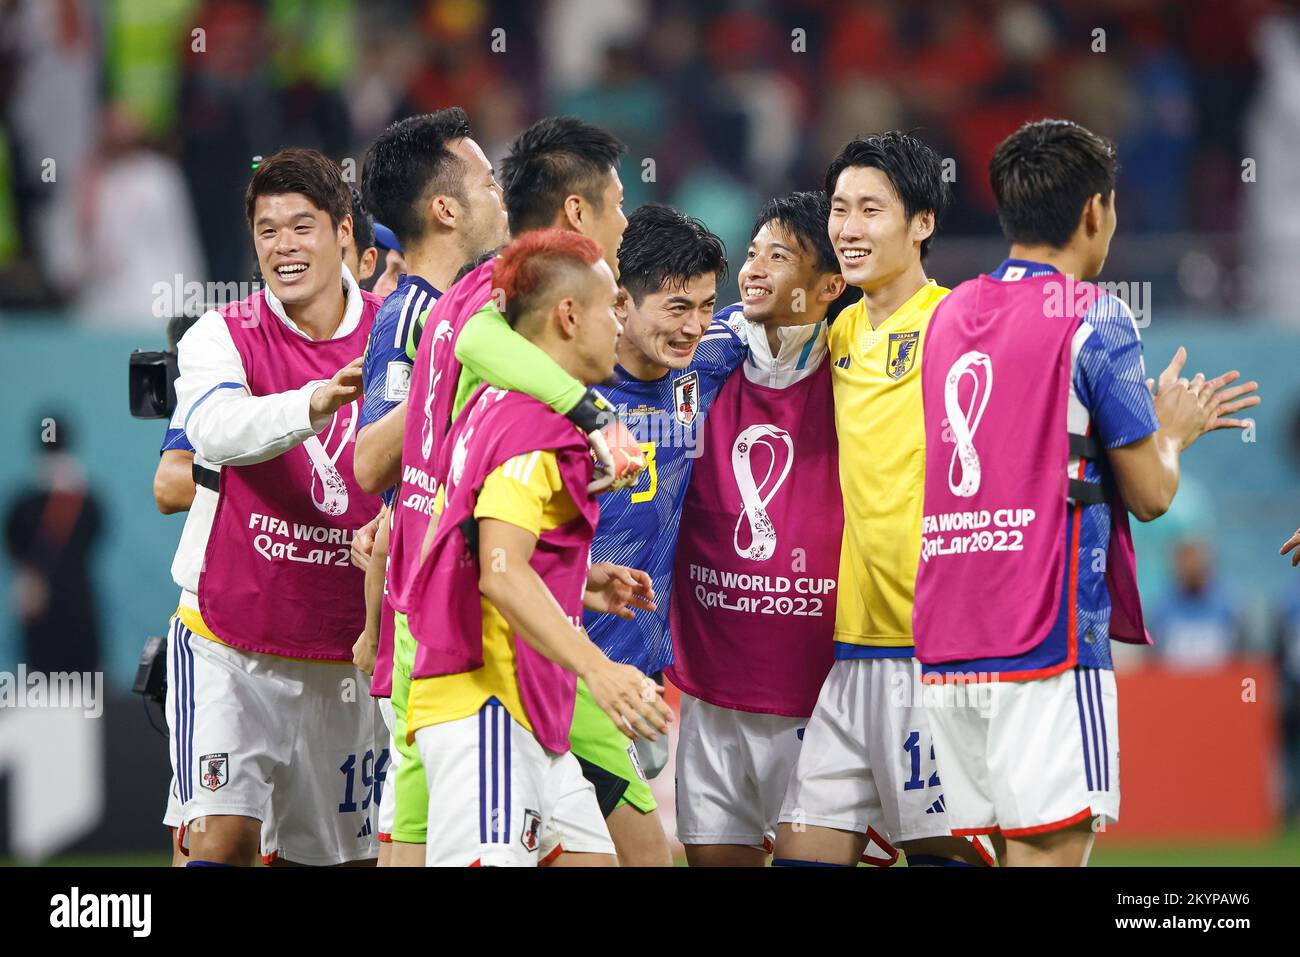 Doha, Catar. 01st Dec, 2022. Players from Japan celebrate ranking during the match between Japan and Spain, valid for the group stage of the World Cup, held at Khalifa International Stadium in Doha, Qatar. Credit: Rodolfo Buhrer/La Imagem/FotoArena/Alamy Live News Stock Photo